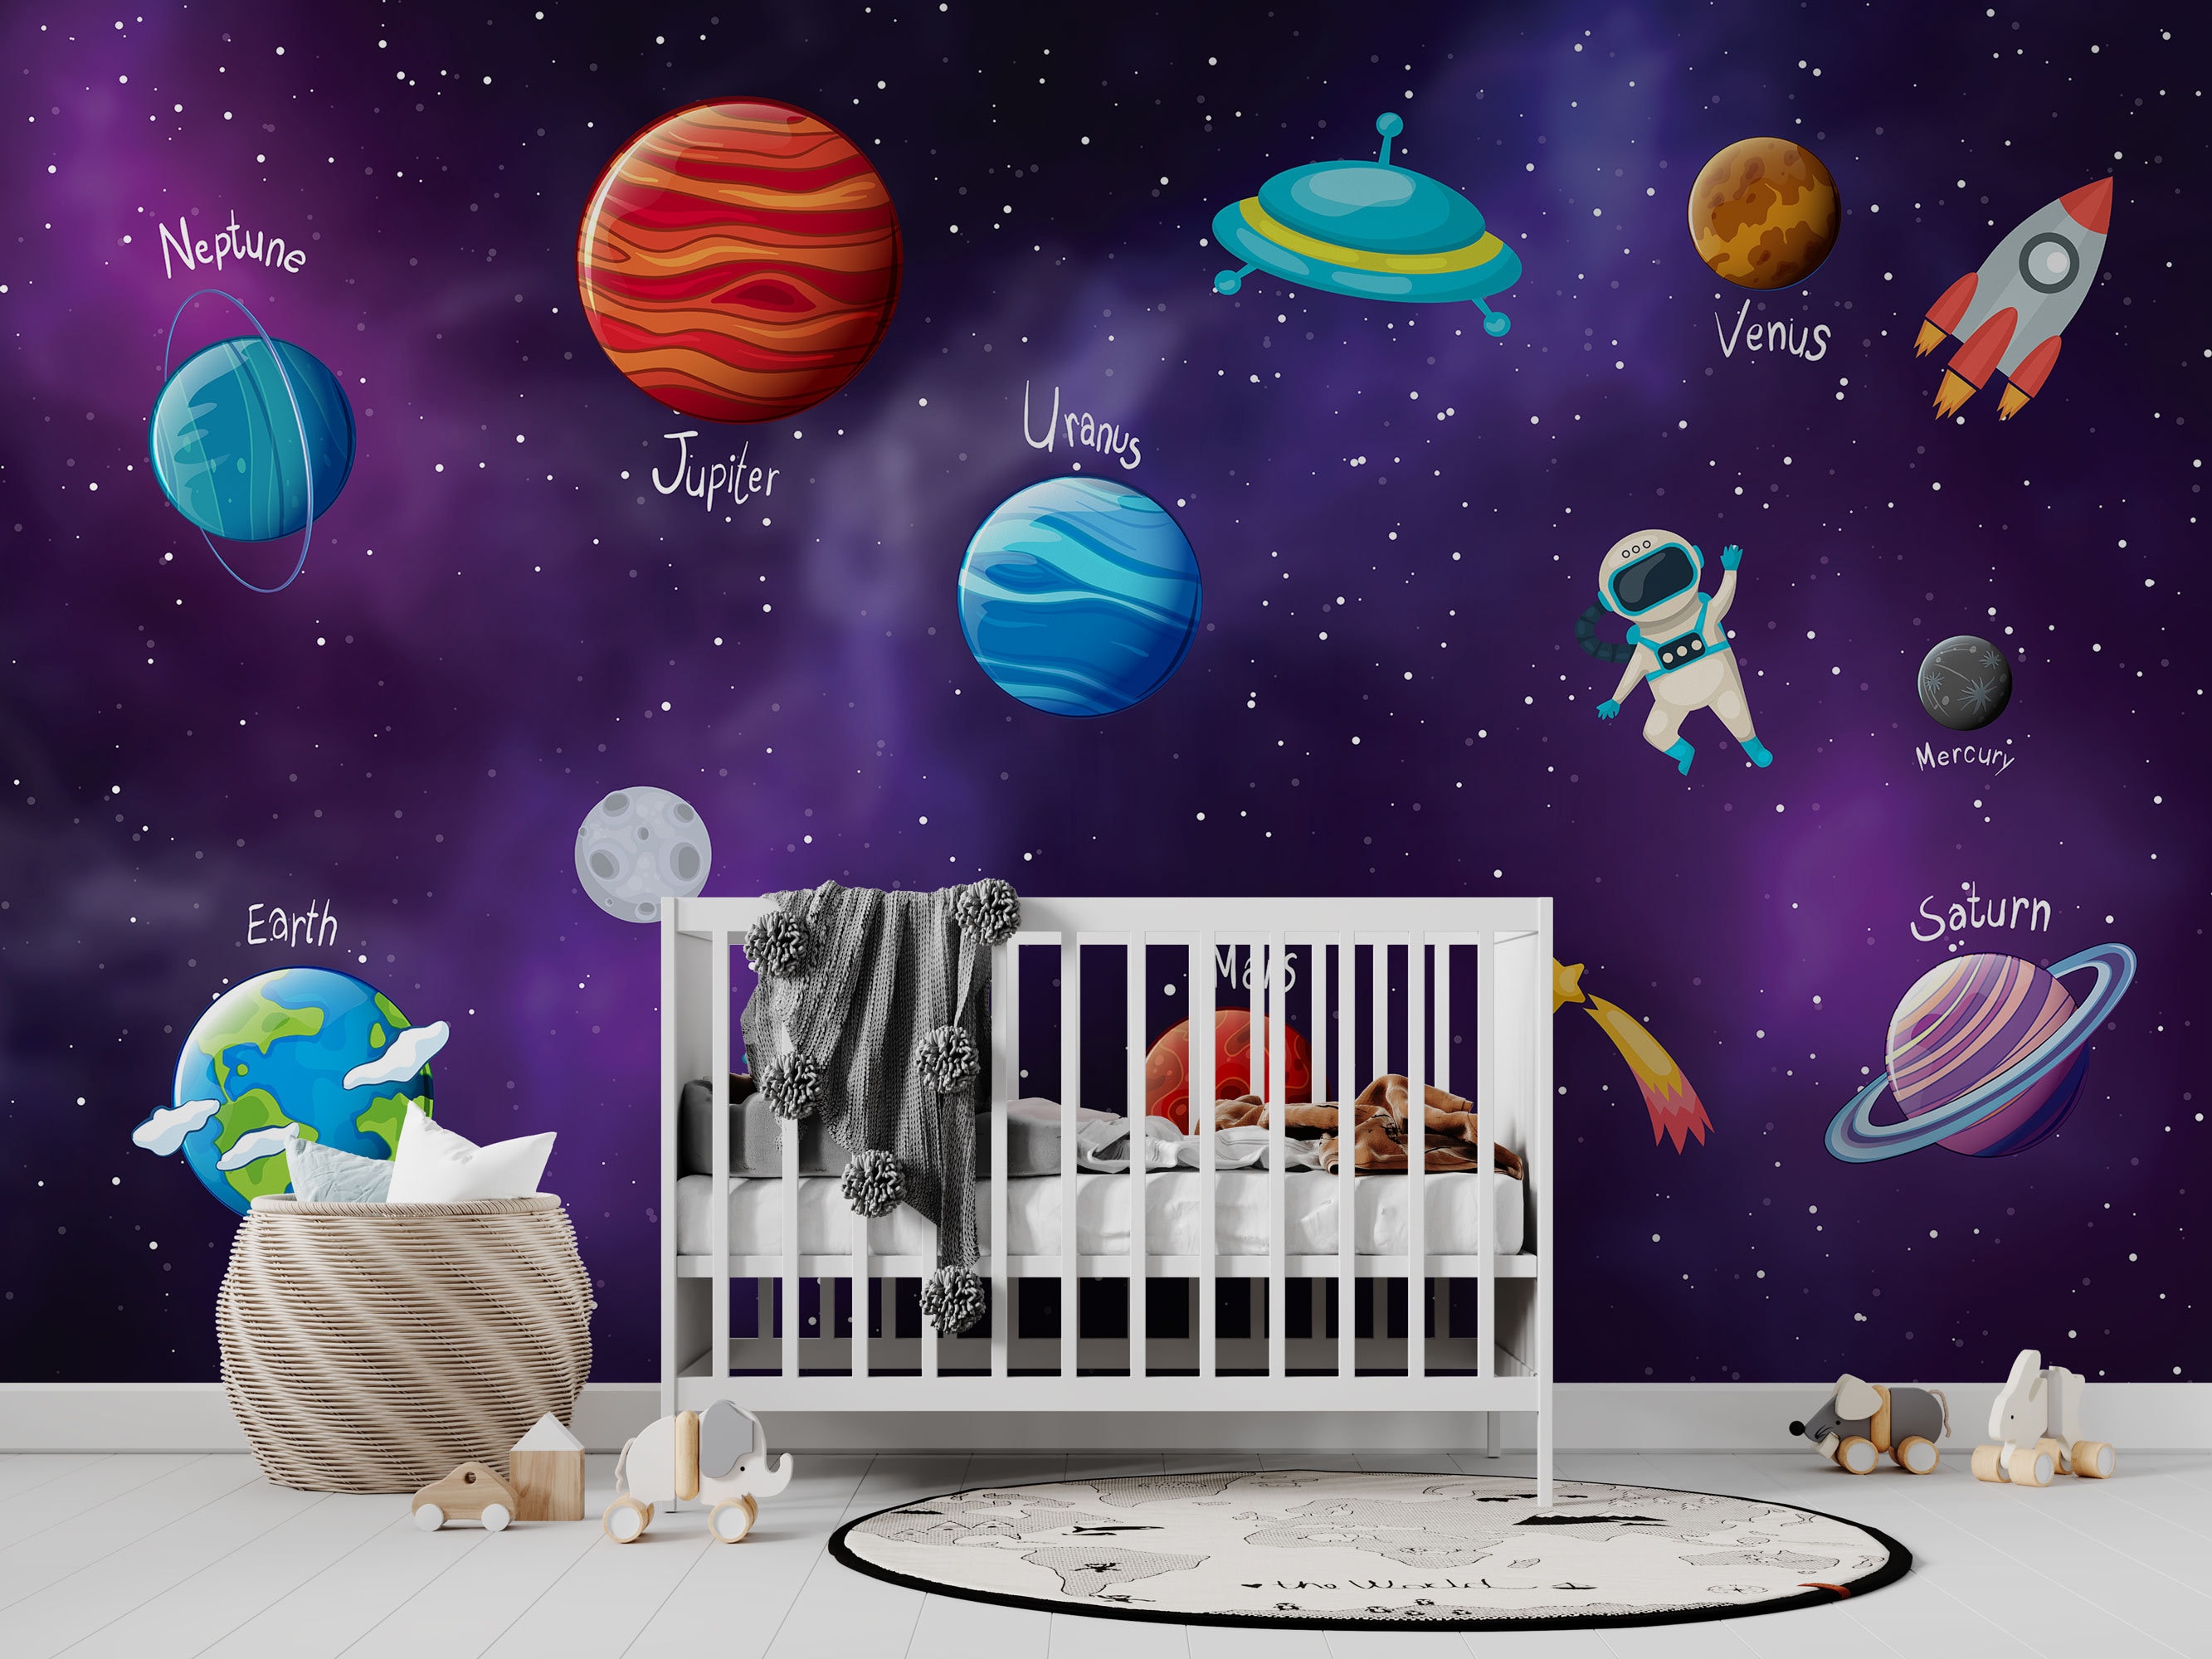 Astronaut Wall Planet for Norway Kids Nursery Baby System Etsy Decor Mural, Wall Room Space Educational Solar Wallpaper for and Room, -